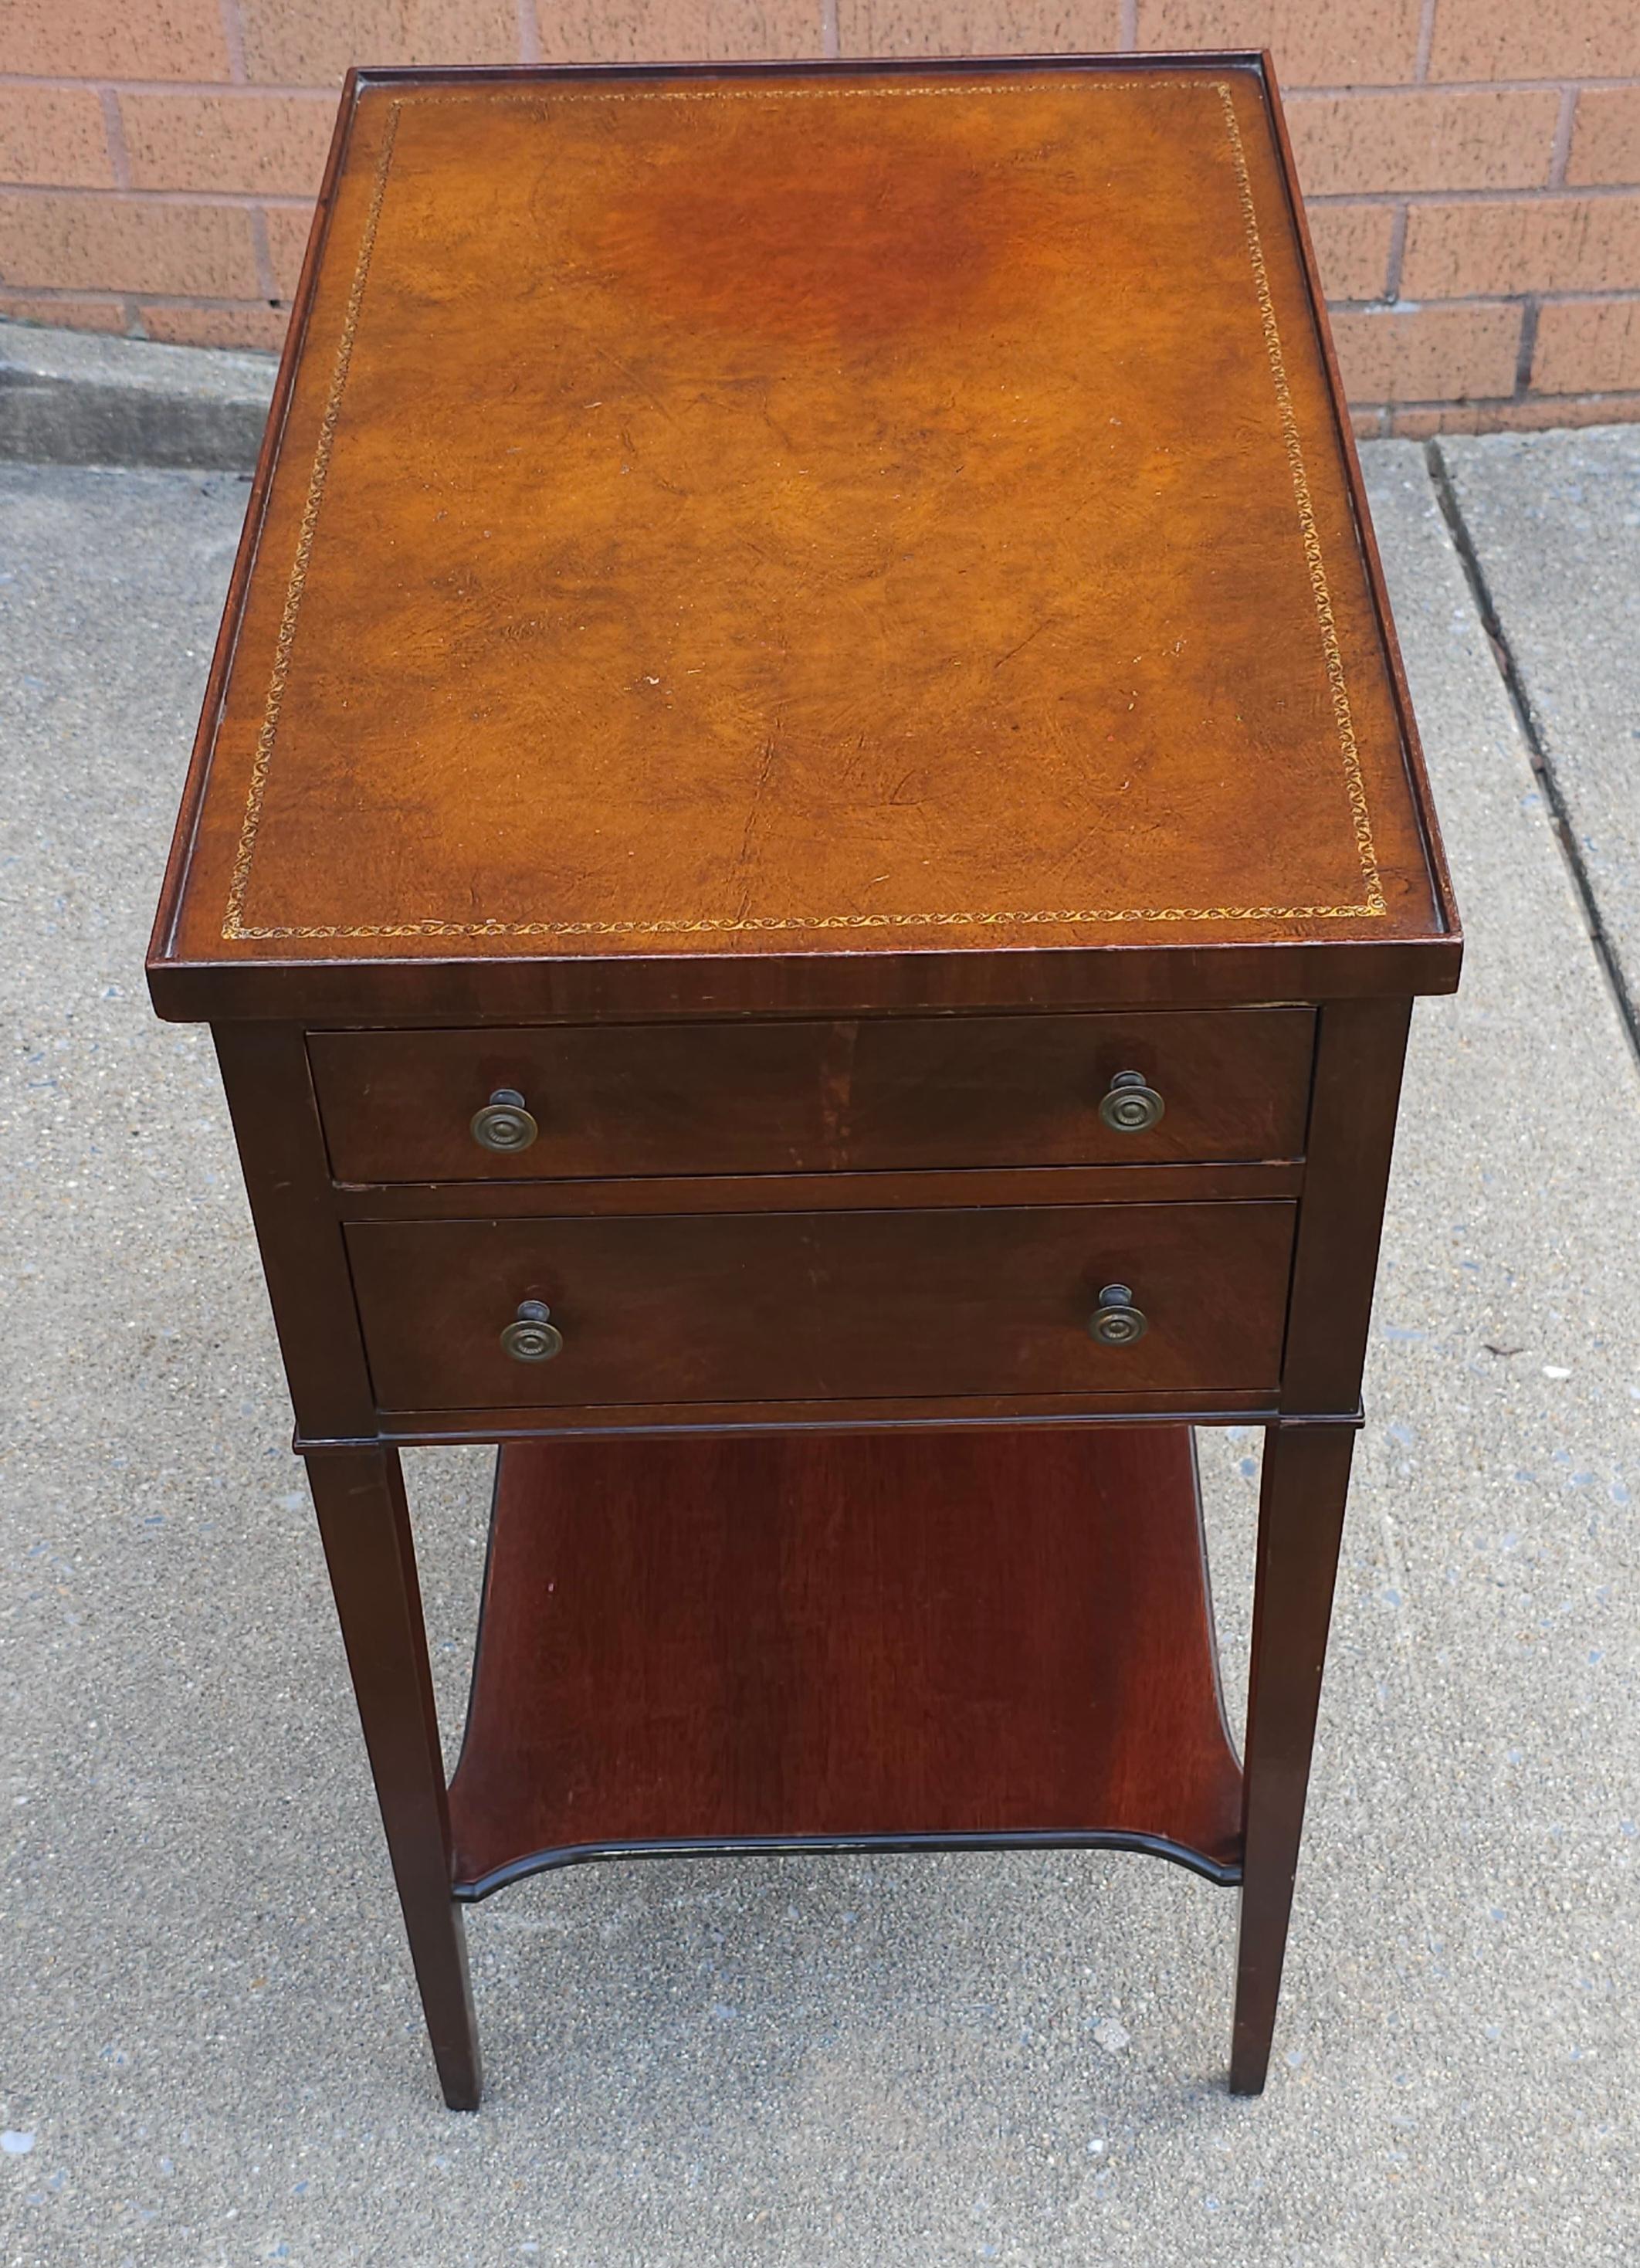 20th Century Imperial Furniture Two-Drawer Tooled Leather Mahogany Tiered Side Table For Sale